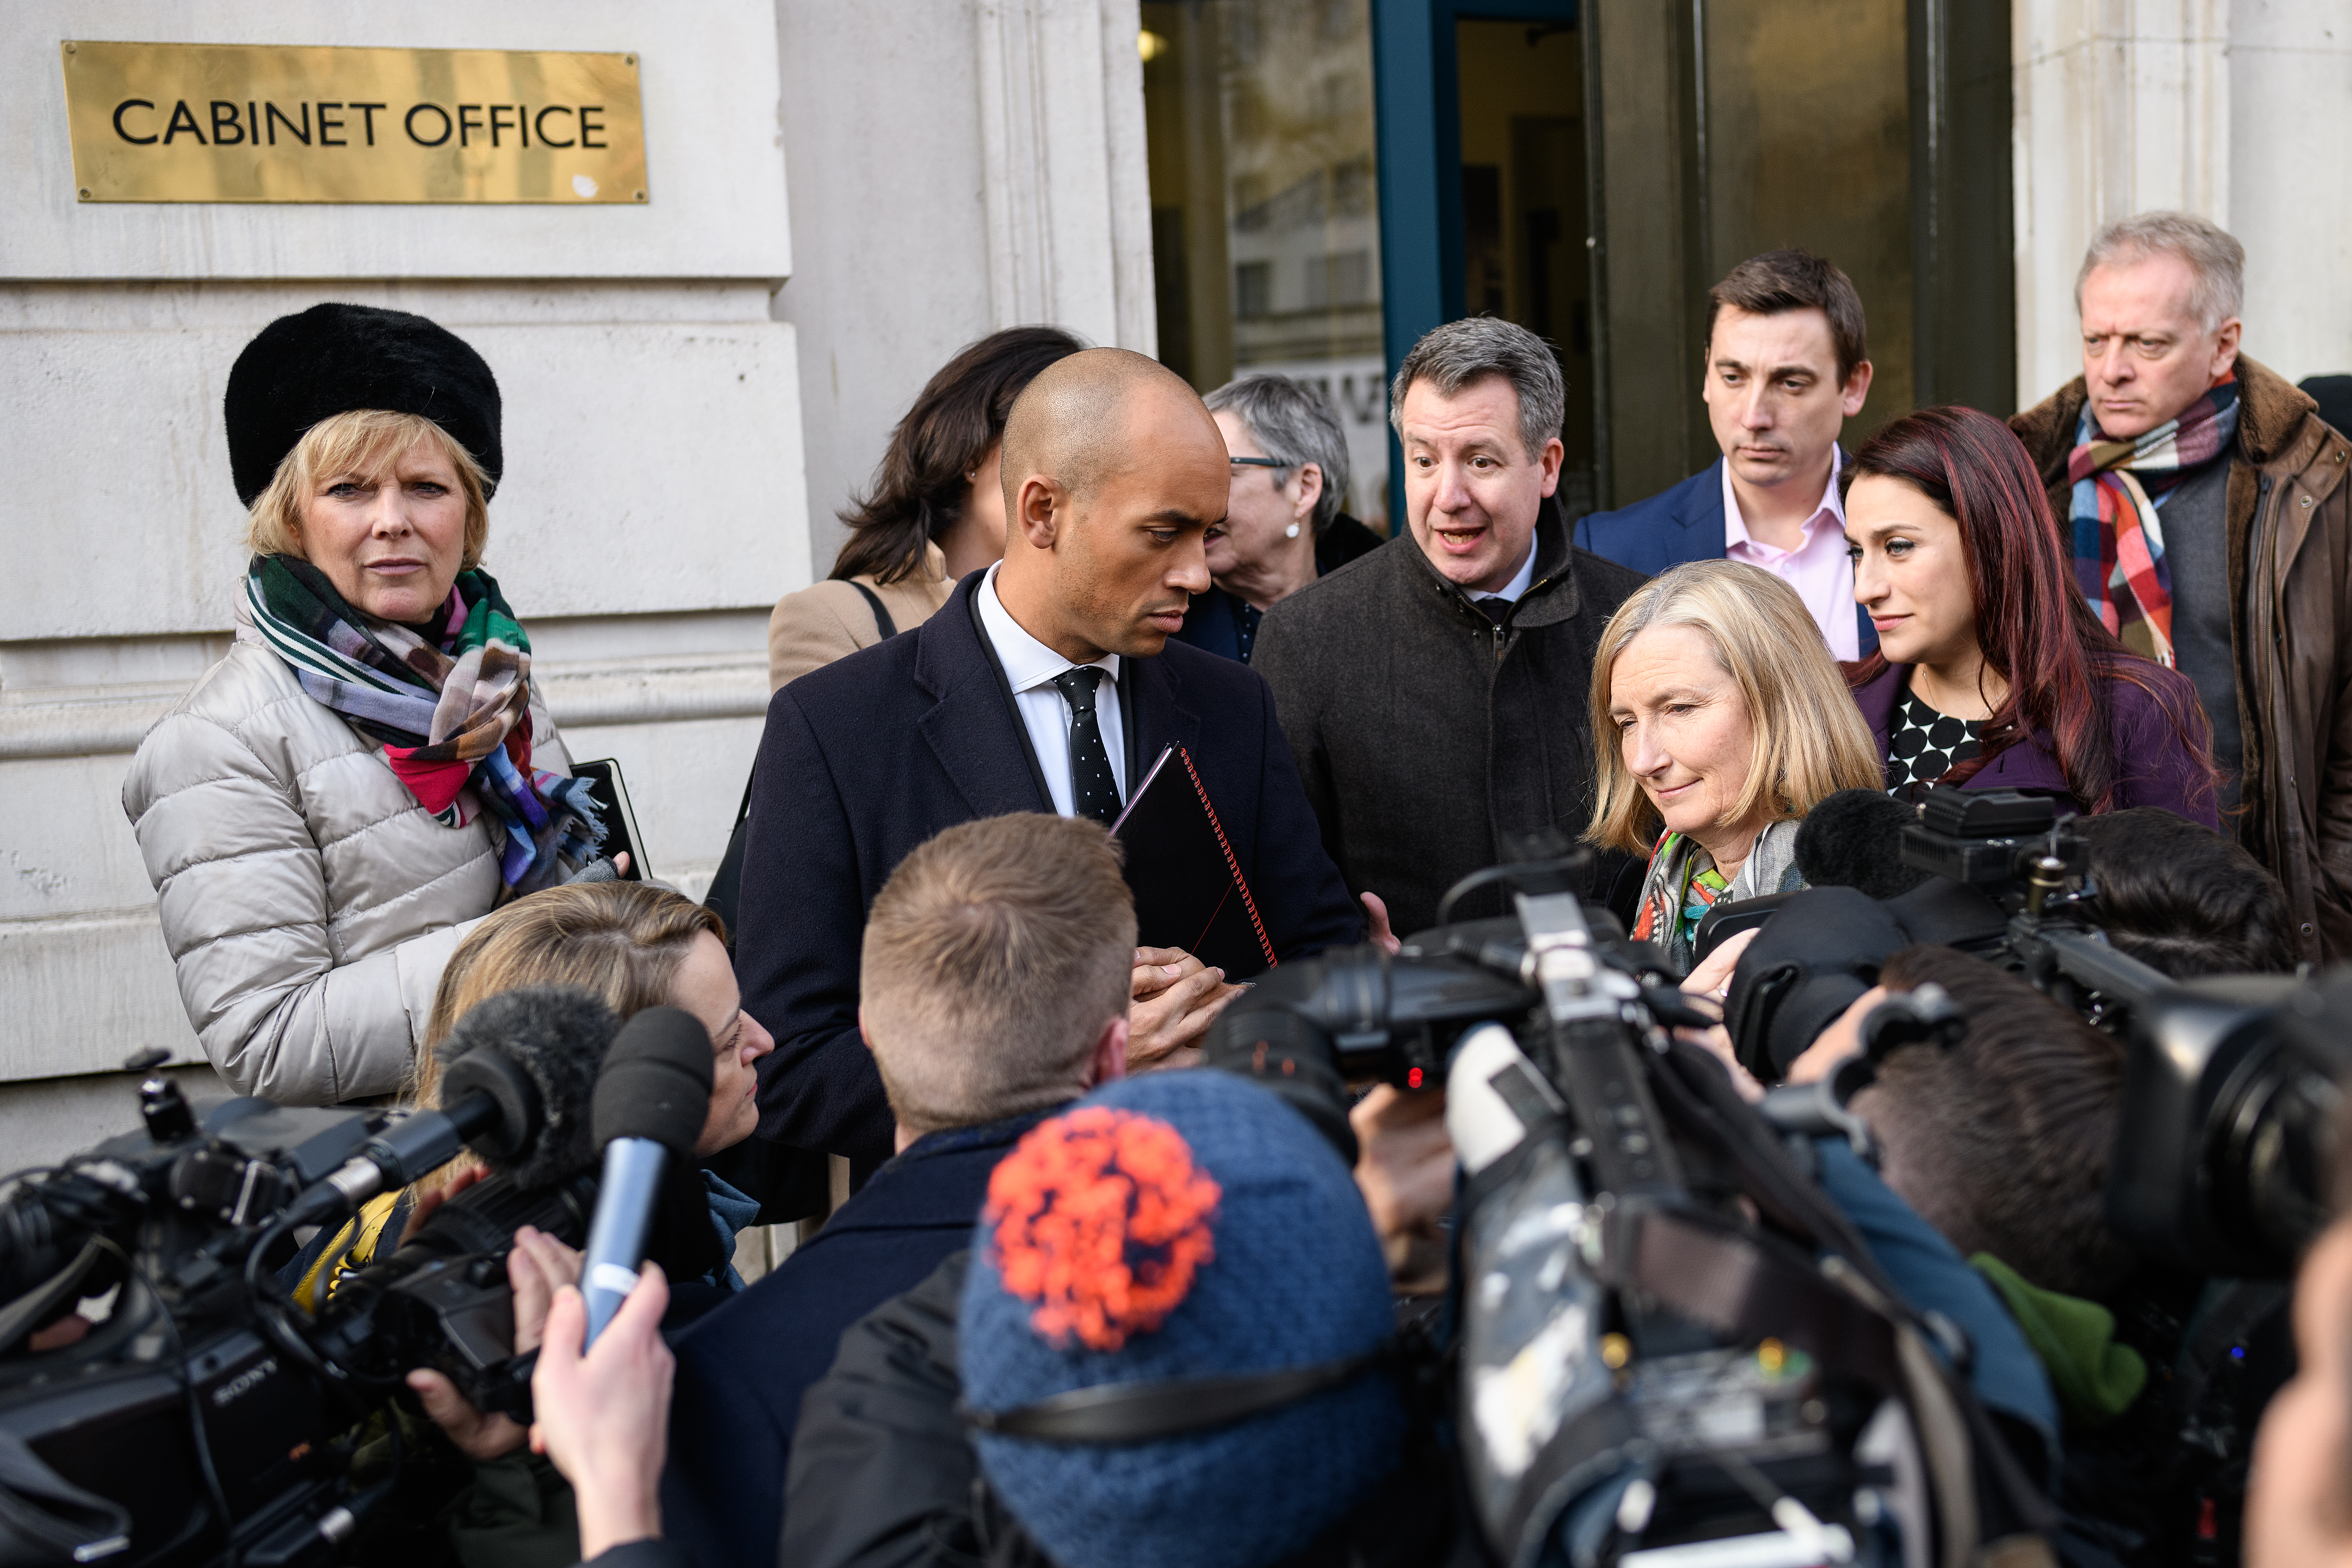 LONDON, ENGLAND - JANUARY 21: Conservative MP Anna Soubry (L), Labour MP Chuka Umunna (2L), Labour MP Chris Leslie (3L), Conservative MP Sarah Wollaston (3R), Labour MP Gavin Shuker (3R), Labour MP Luciana Berger (2R) and Conservative MP Phillip Lee (R) speak with the media outside the Cabinet Office following a Brexit meeting with Theresa May's Chief of Staff Gavin Barwell and David Liddington MP on January 21, 2019 in London, England. British Prime Minister Theresa May is set to attempt to convince Conservative Brexiteers and DUP MPs to back her current withdrawal deal by resolving Irish backstop concerns. Her attempts to reach a cross-party agreement last week were thwarted after the Labour Party leader Jeremy Corbyn insisted on the removal of leaving the European Union with "no deal" as an option in the negotations on how to proceed with Brexit, before he would talk to the Government. (Photo by Leon Neal/Getty Images)